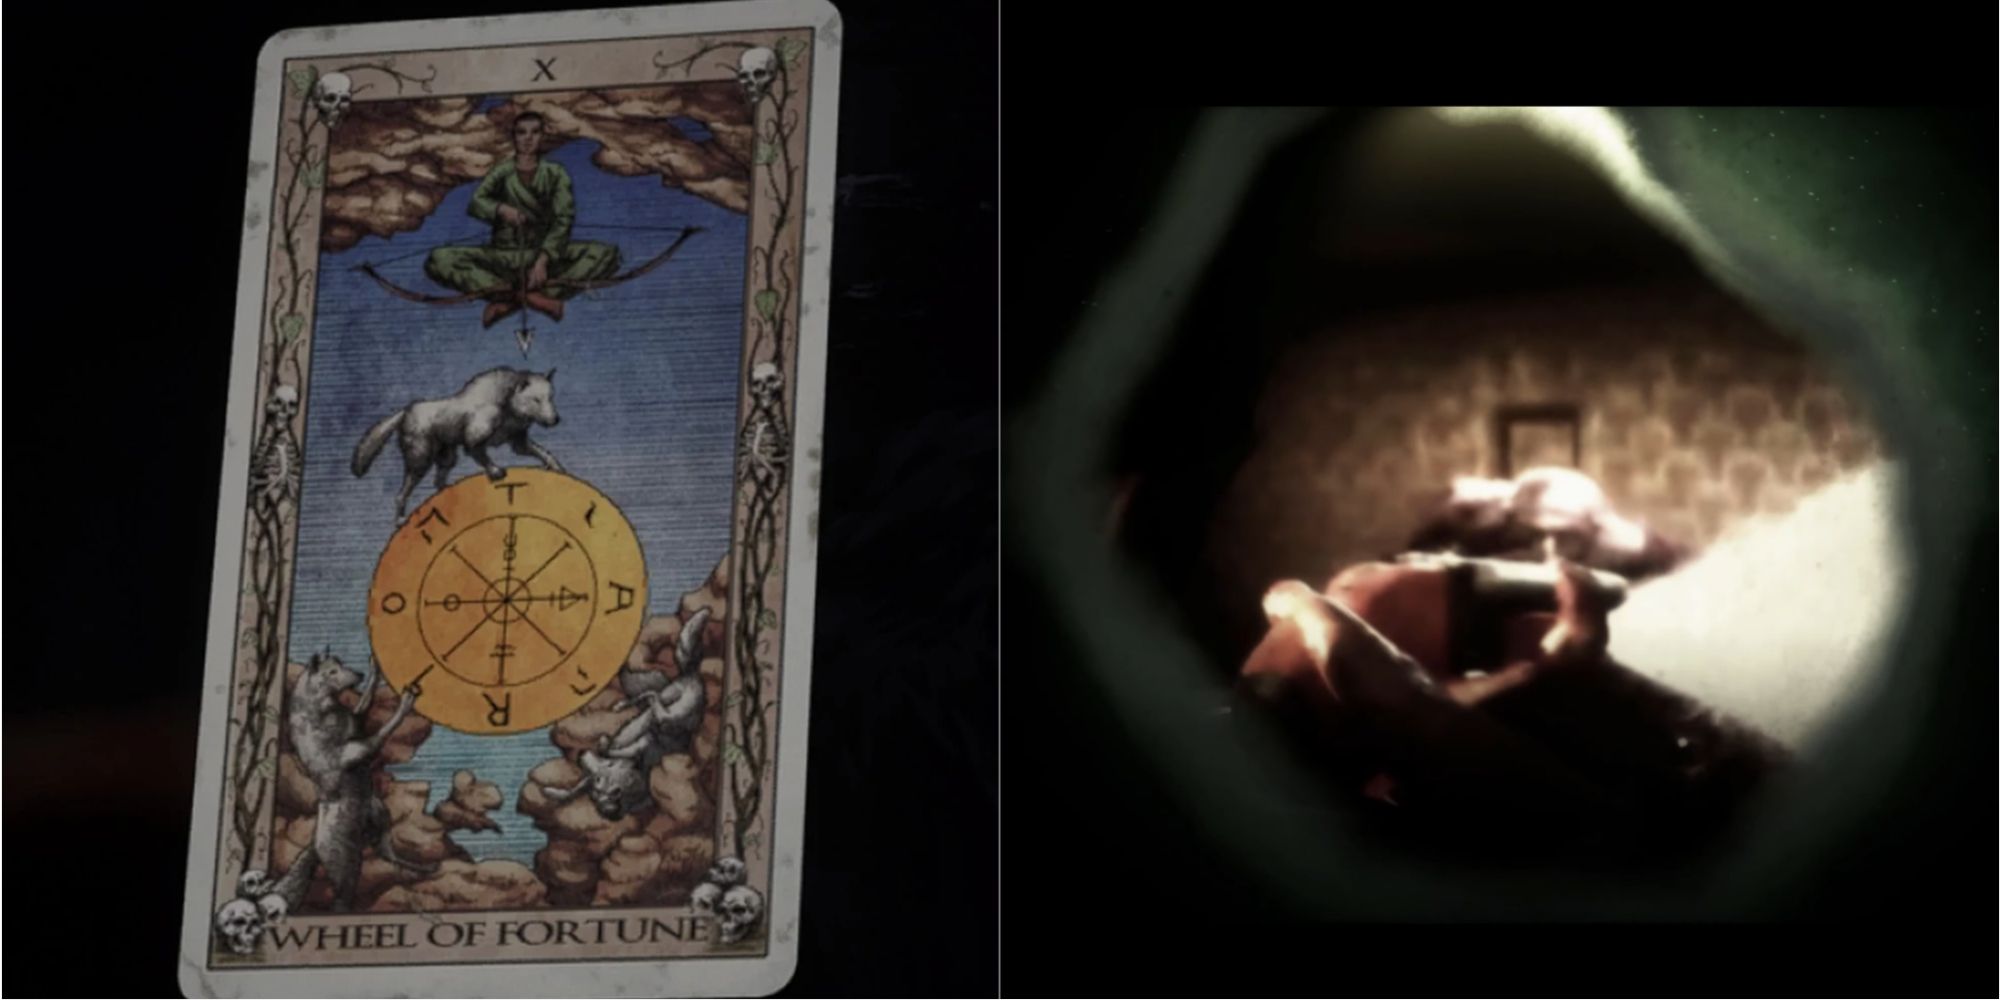 The Quarry's rendition of the major arcana tarot card Wheel of Fortune. Ryan holds a shotgun to Chris in werewolf form